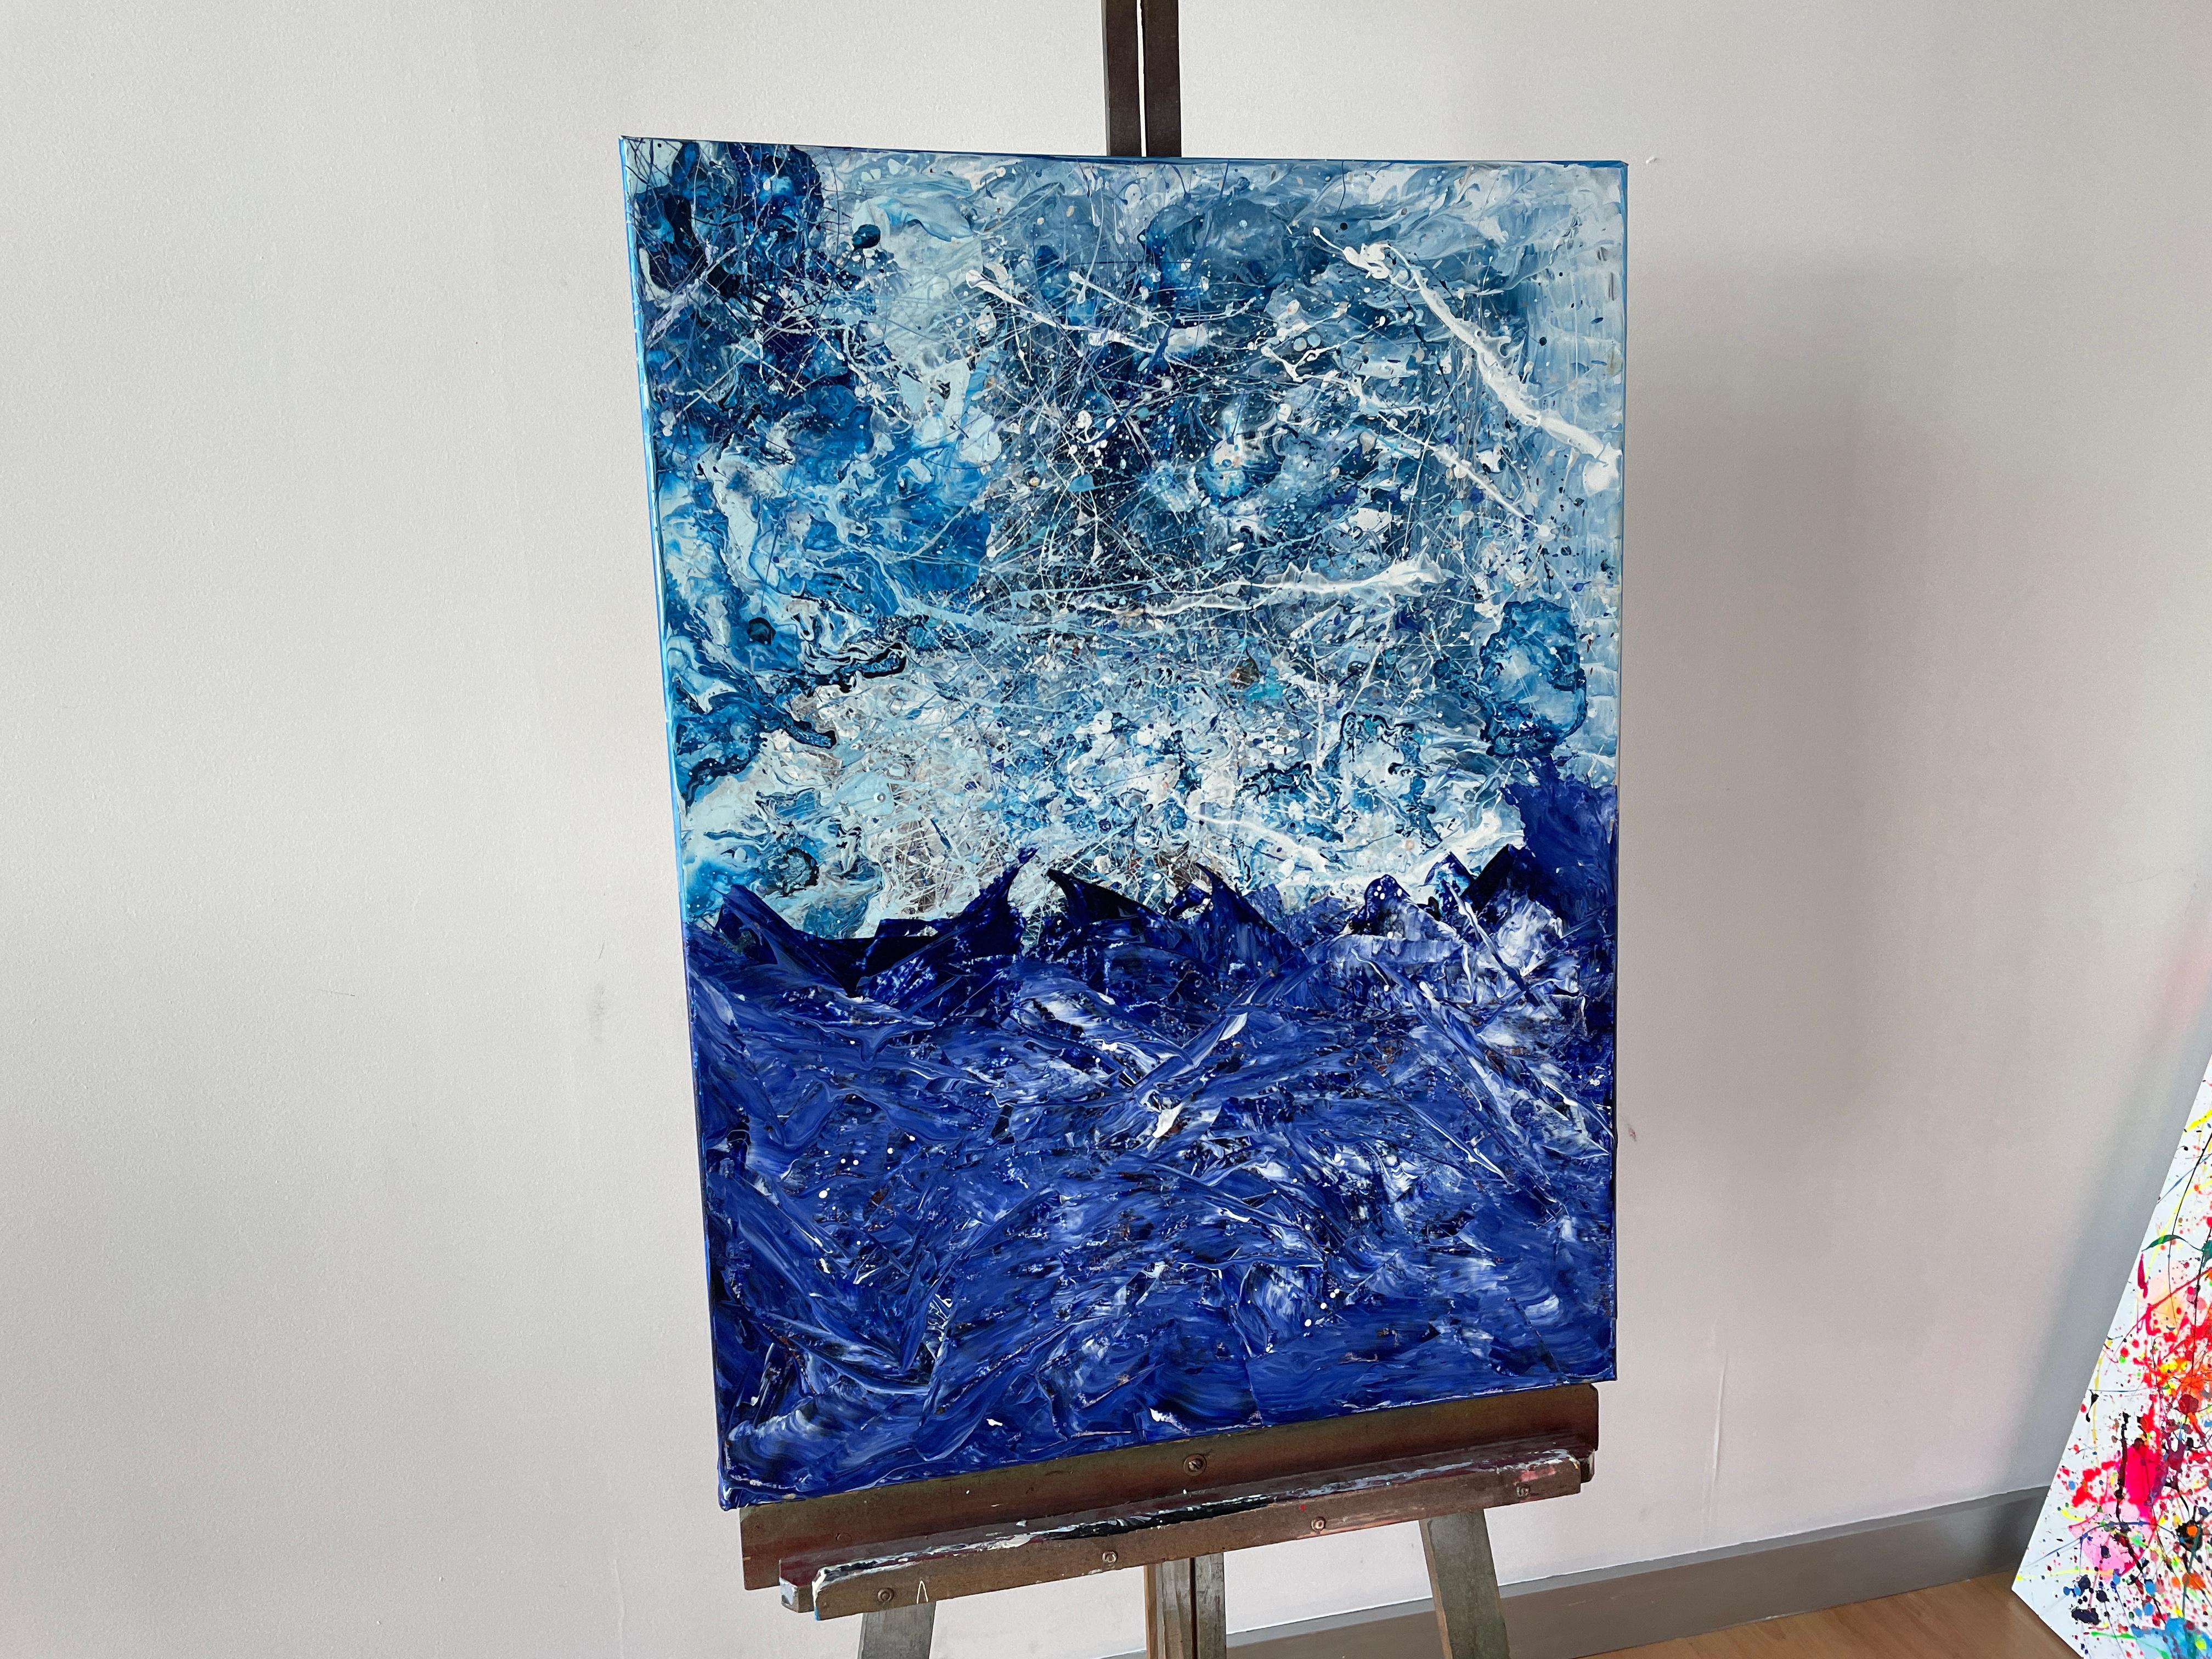 
In this expressive piece of action painting, a whirlwind of captivating blues merges to bring to life a stunning seascape in turmoil. The intense shades of blue, from deep sapphire to vibrant turquoise, shape tumultuous waves rising with strength